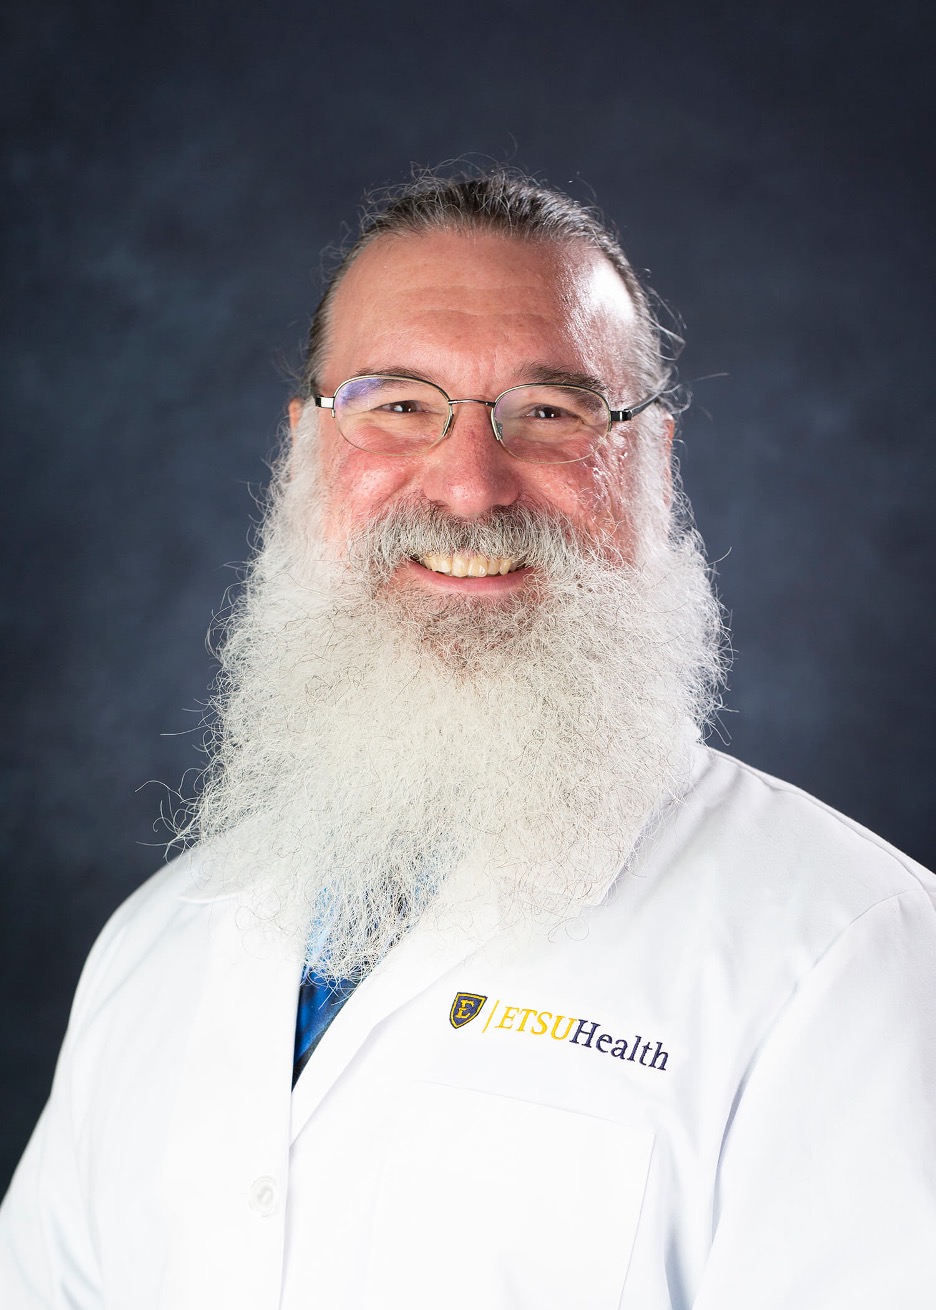 Photo of Reid Blackwelder, MD, FAAFP Associate Dean of Graduate Medical Education and Continuing Education for Health Professionals, Designated Institutional Official